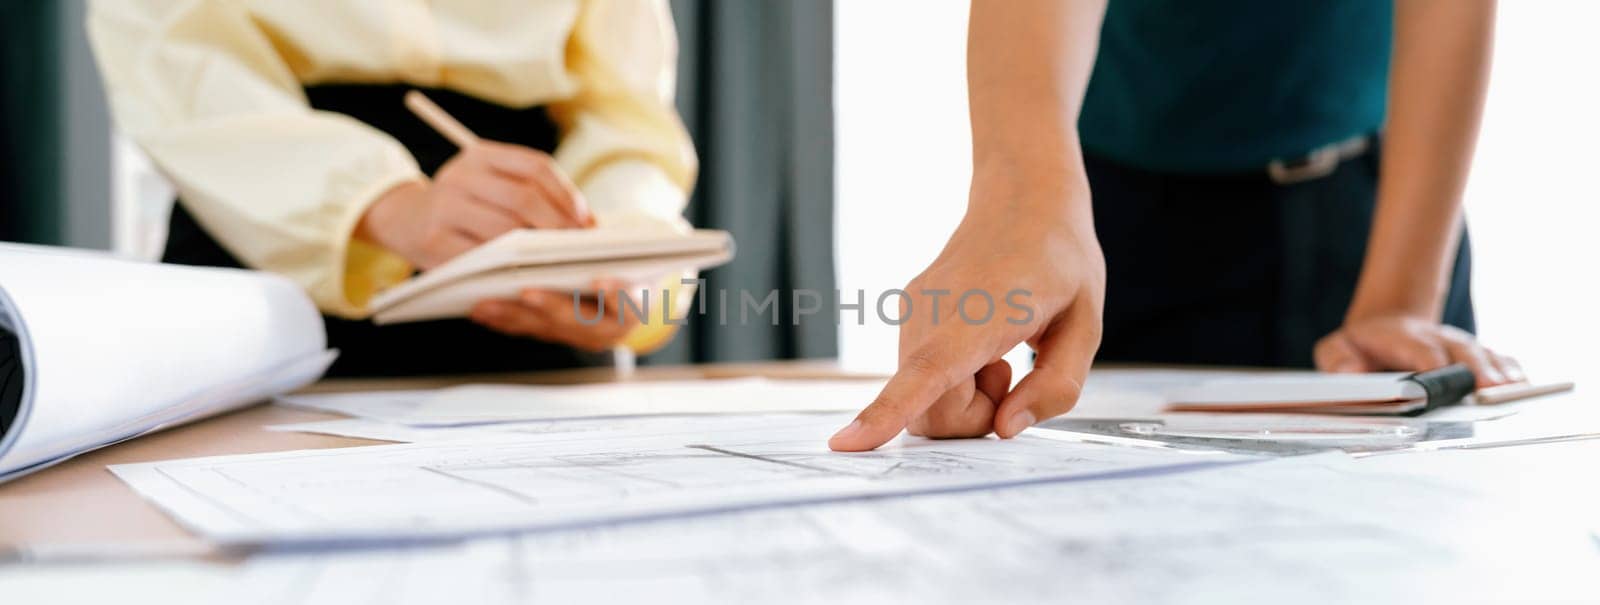 Skilled architect engineer team discuss about architectural project while project manager using laptop analysis data at meeting table with architectural document scatter around. Closeup. Delineation.